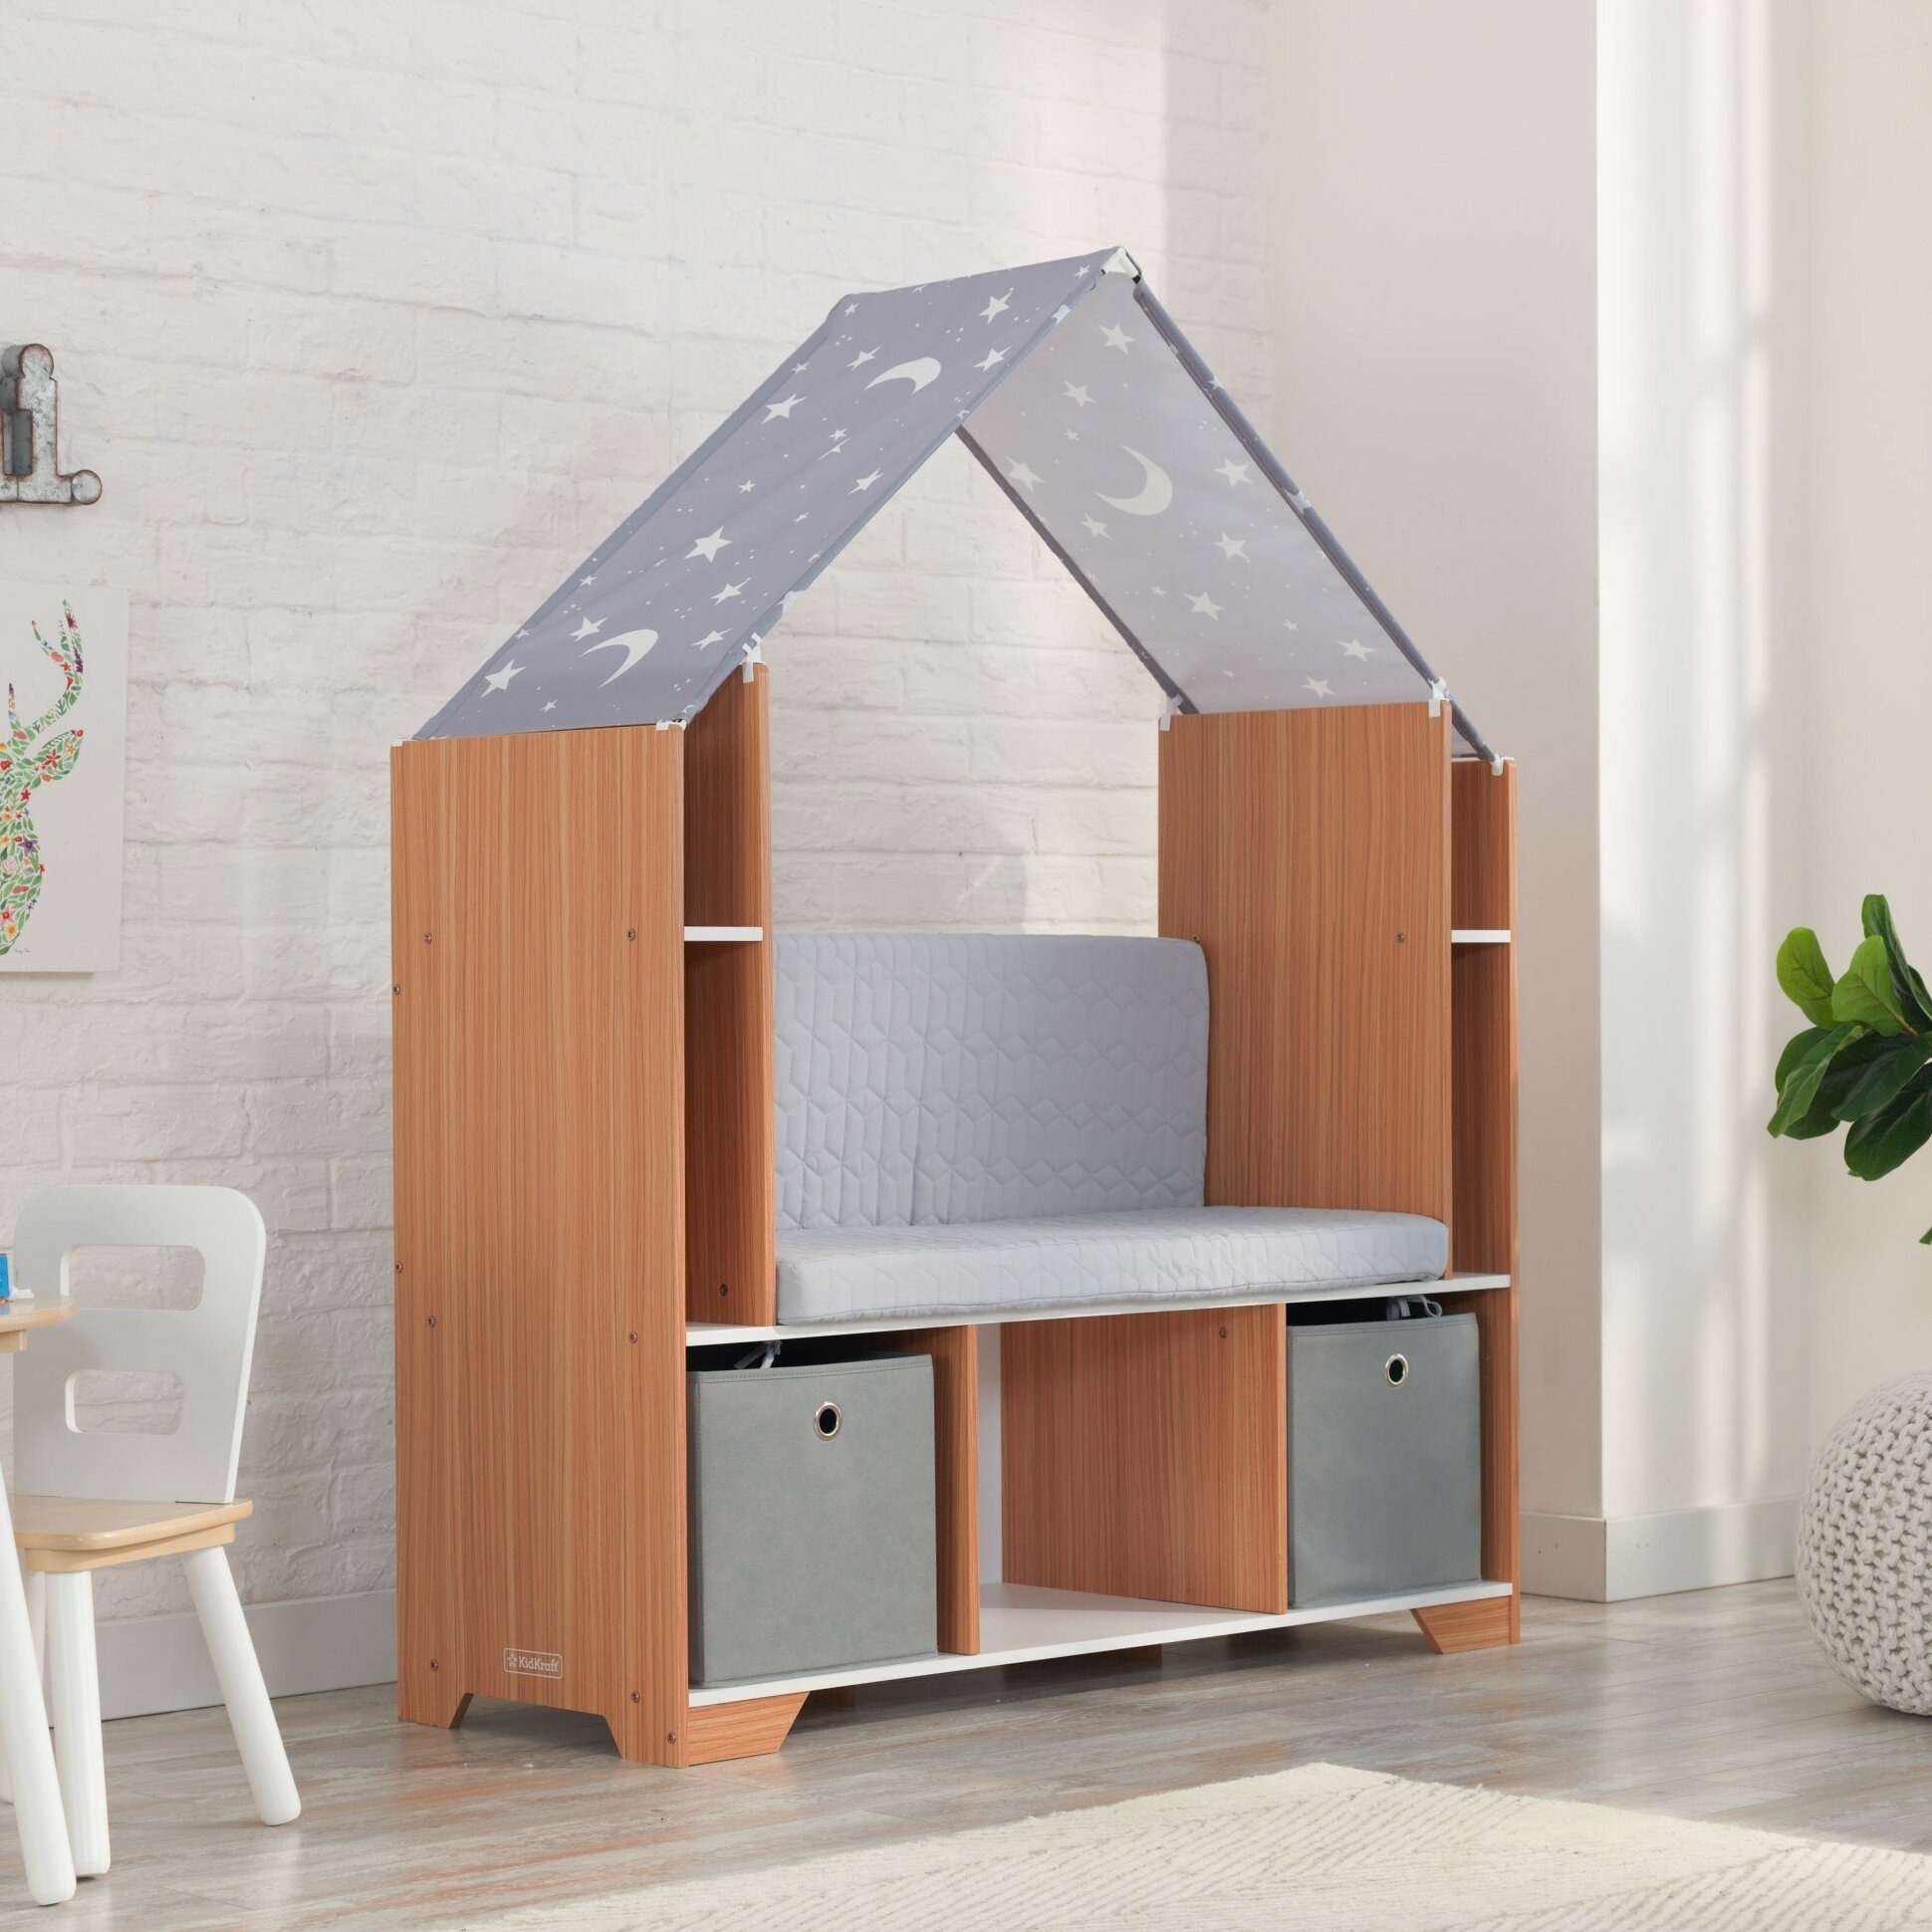 the gray bookcase with a moon and star patterned canopy